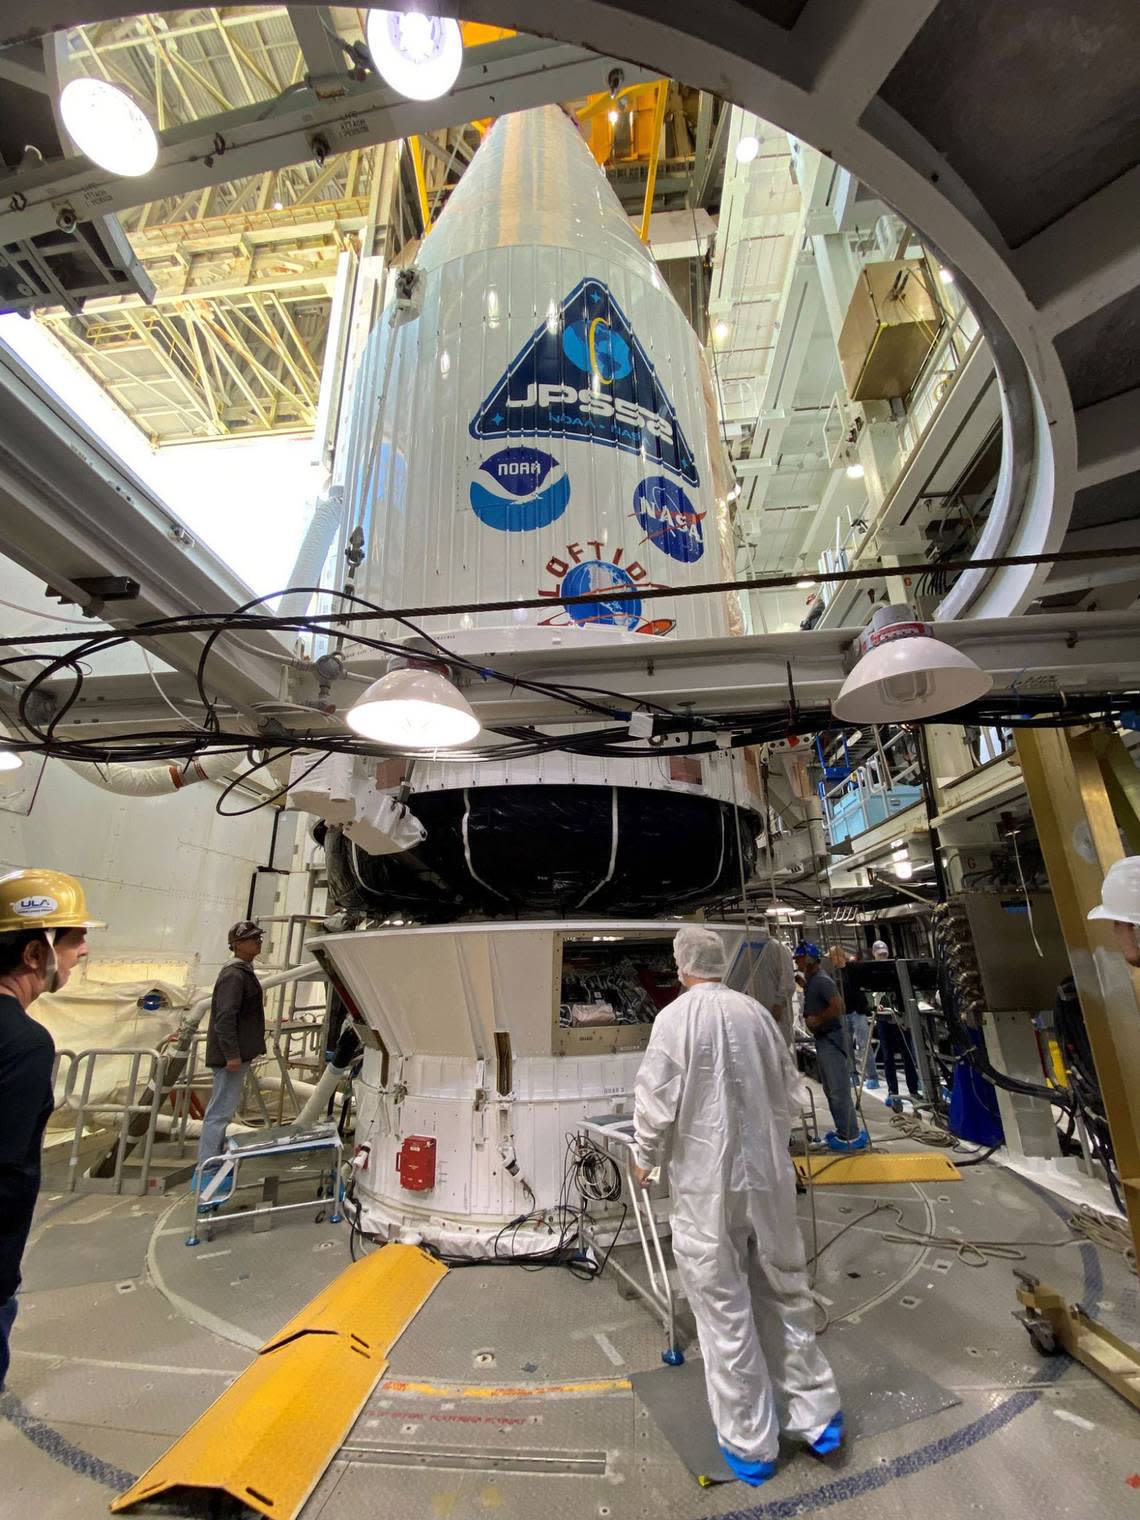 Tucked into the payload fairing or rocket nose cone, a weather observatory and technology demonstrator are mounted atop its ride to space aboard an Atlas V rocket from Vandenberg Space Force Base near Lompoc.